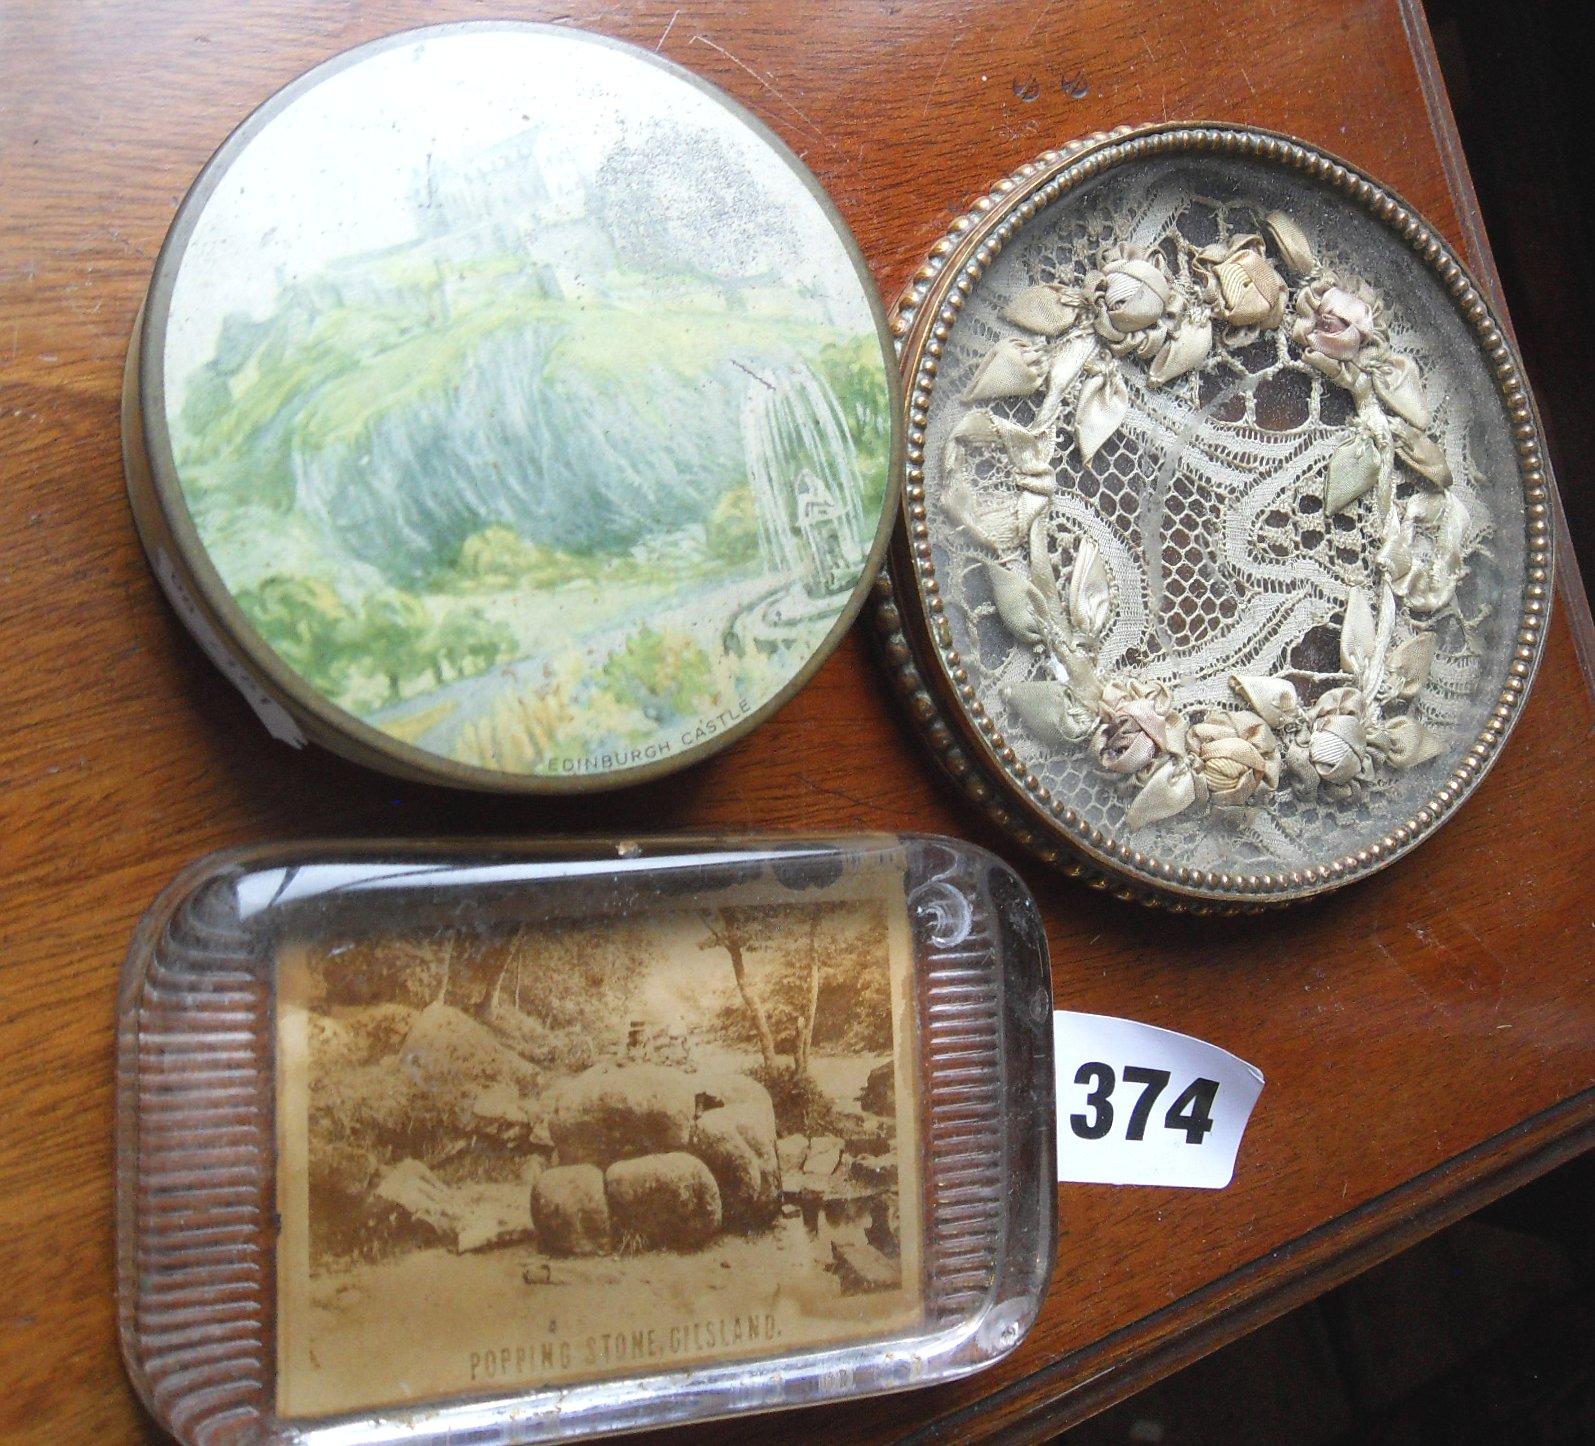 Victorian paperweight with print of “Popping Stone of Giesland”, a glass & bronze frame enclosing